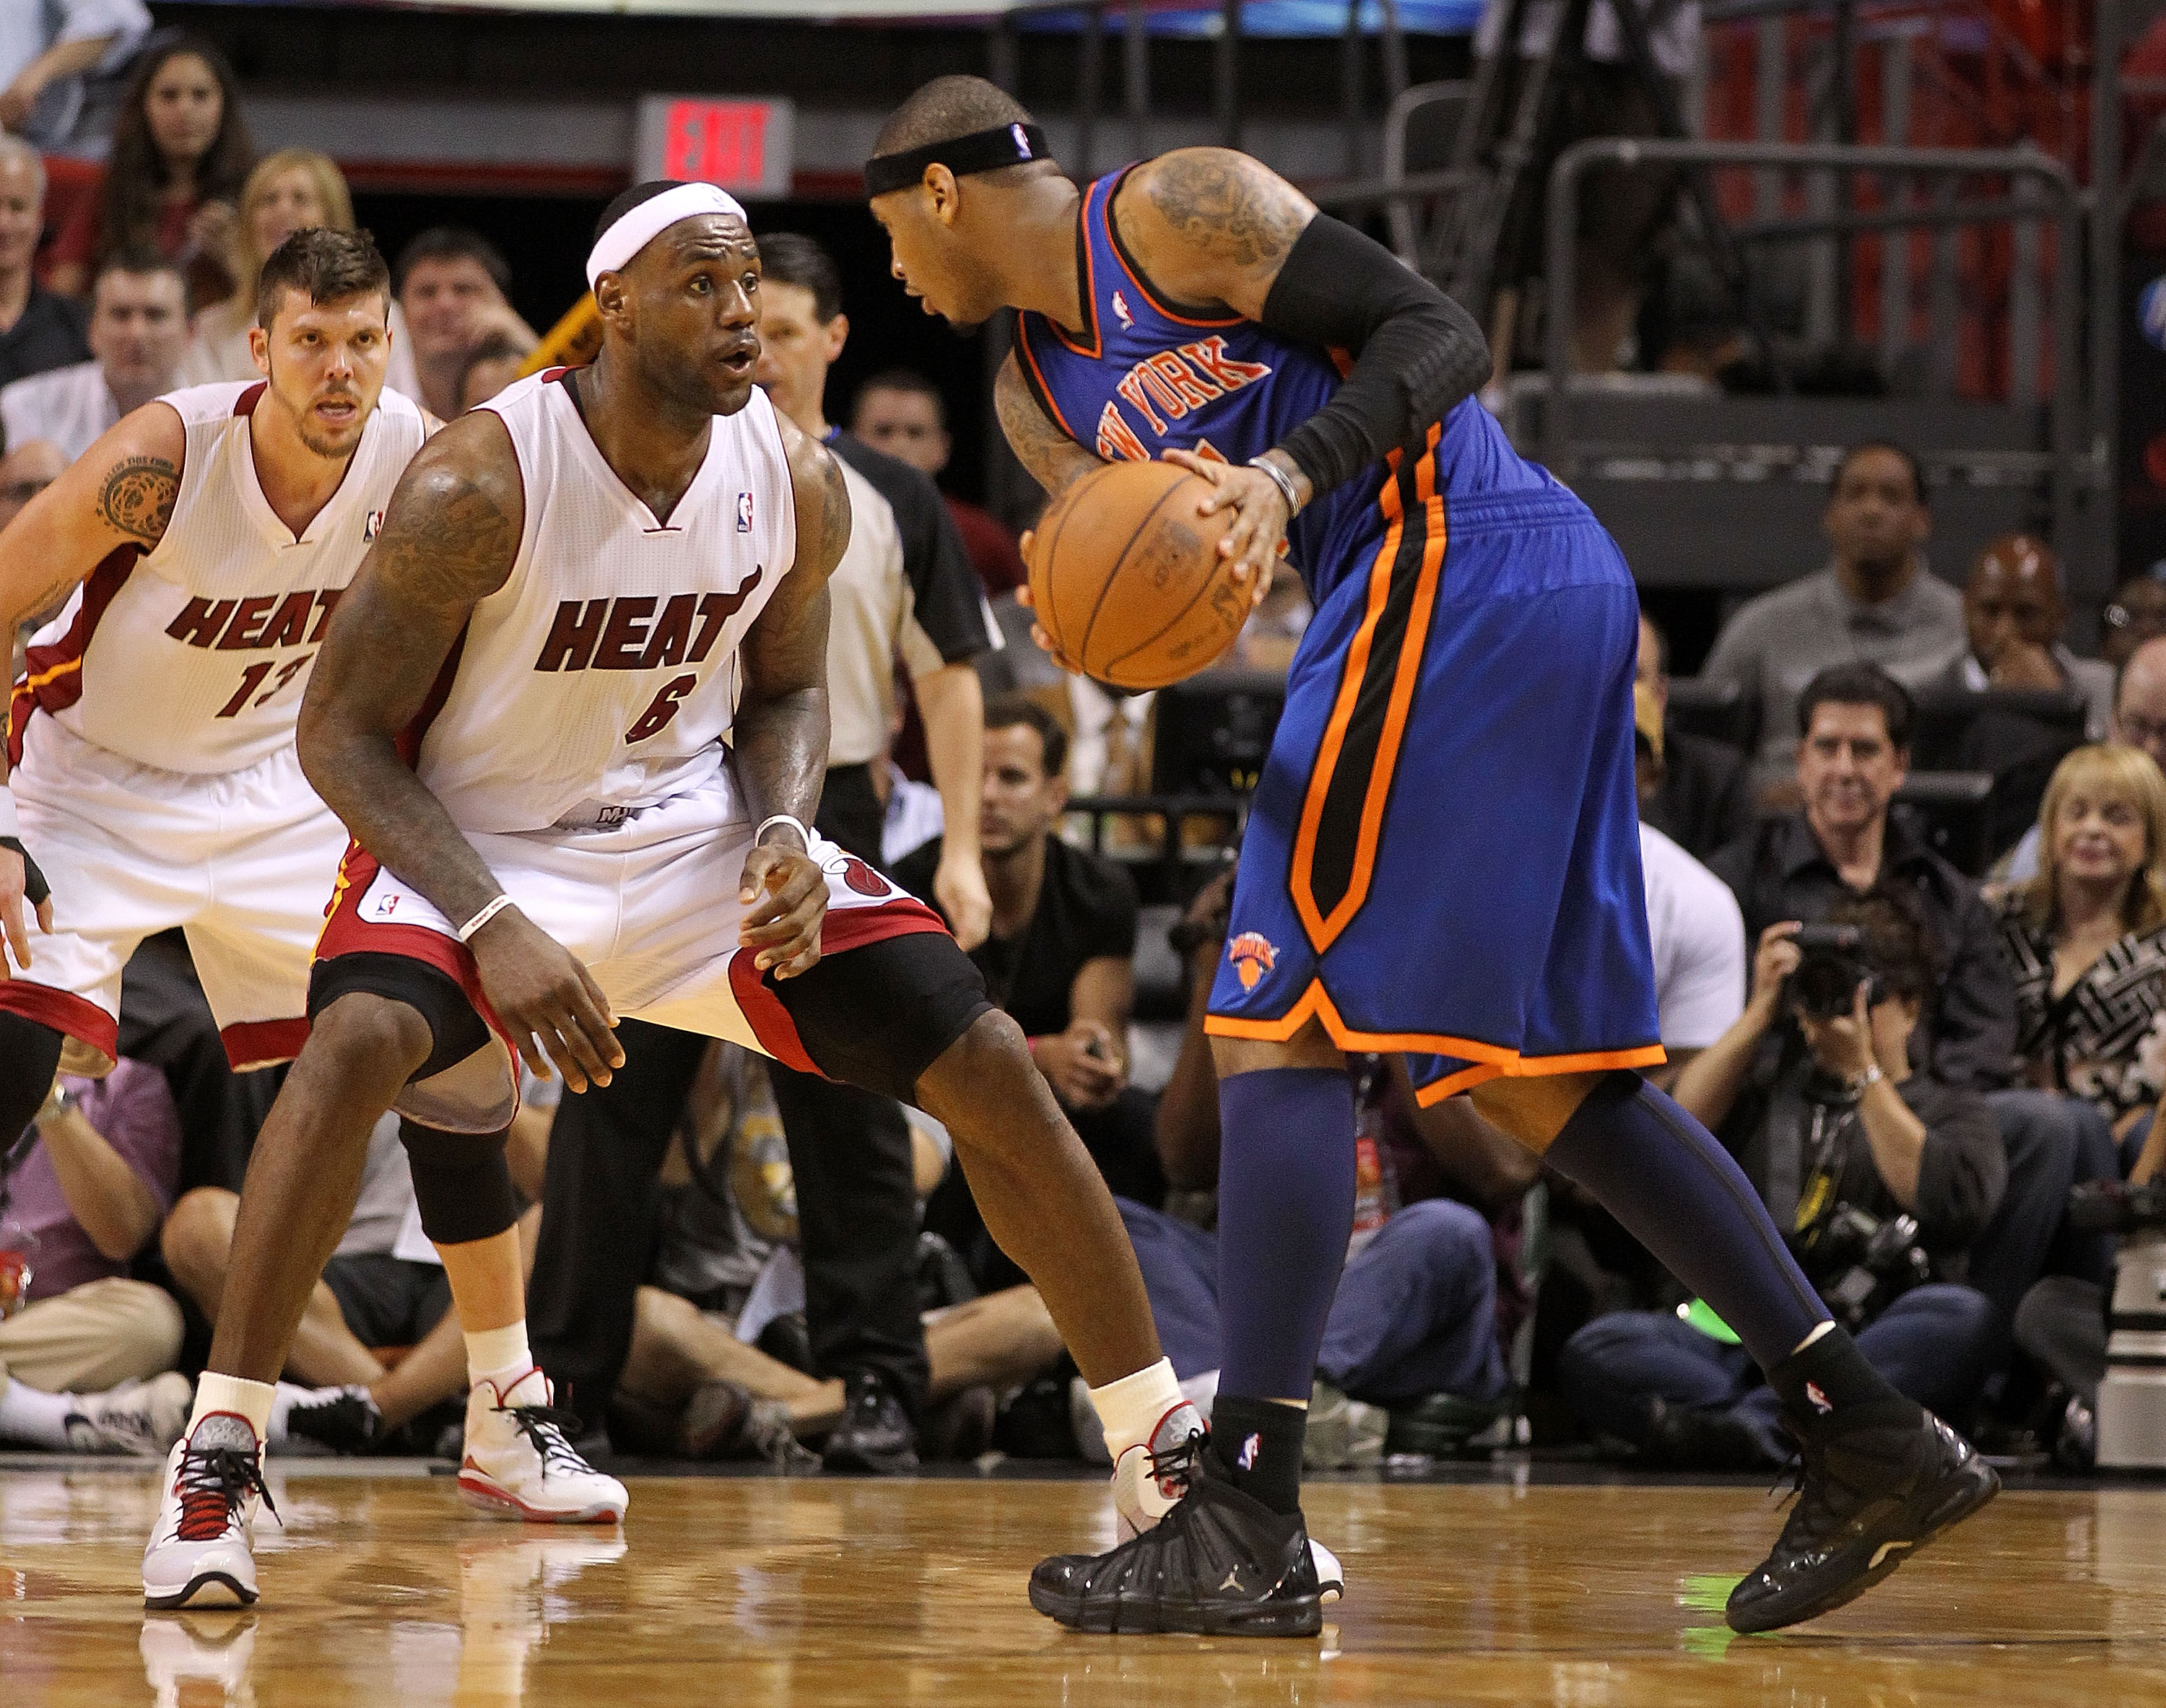 MIAMI, FL - FEBRUARY 27:  Carmelo Anthony #7 of the New York Knicks is guarded by LeBron James #6 of the Miami Heat during a game at American Airlines Arena on February 27, 2011 in Miami, Florida. NOTE TO USER: User expressly acknowledges and agrees that,